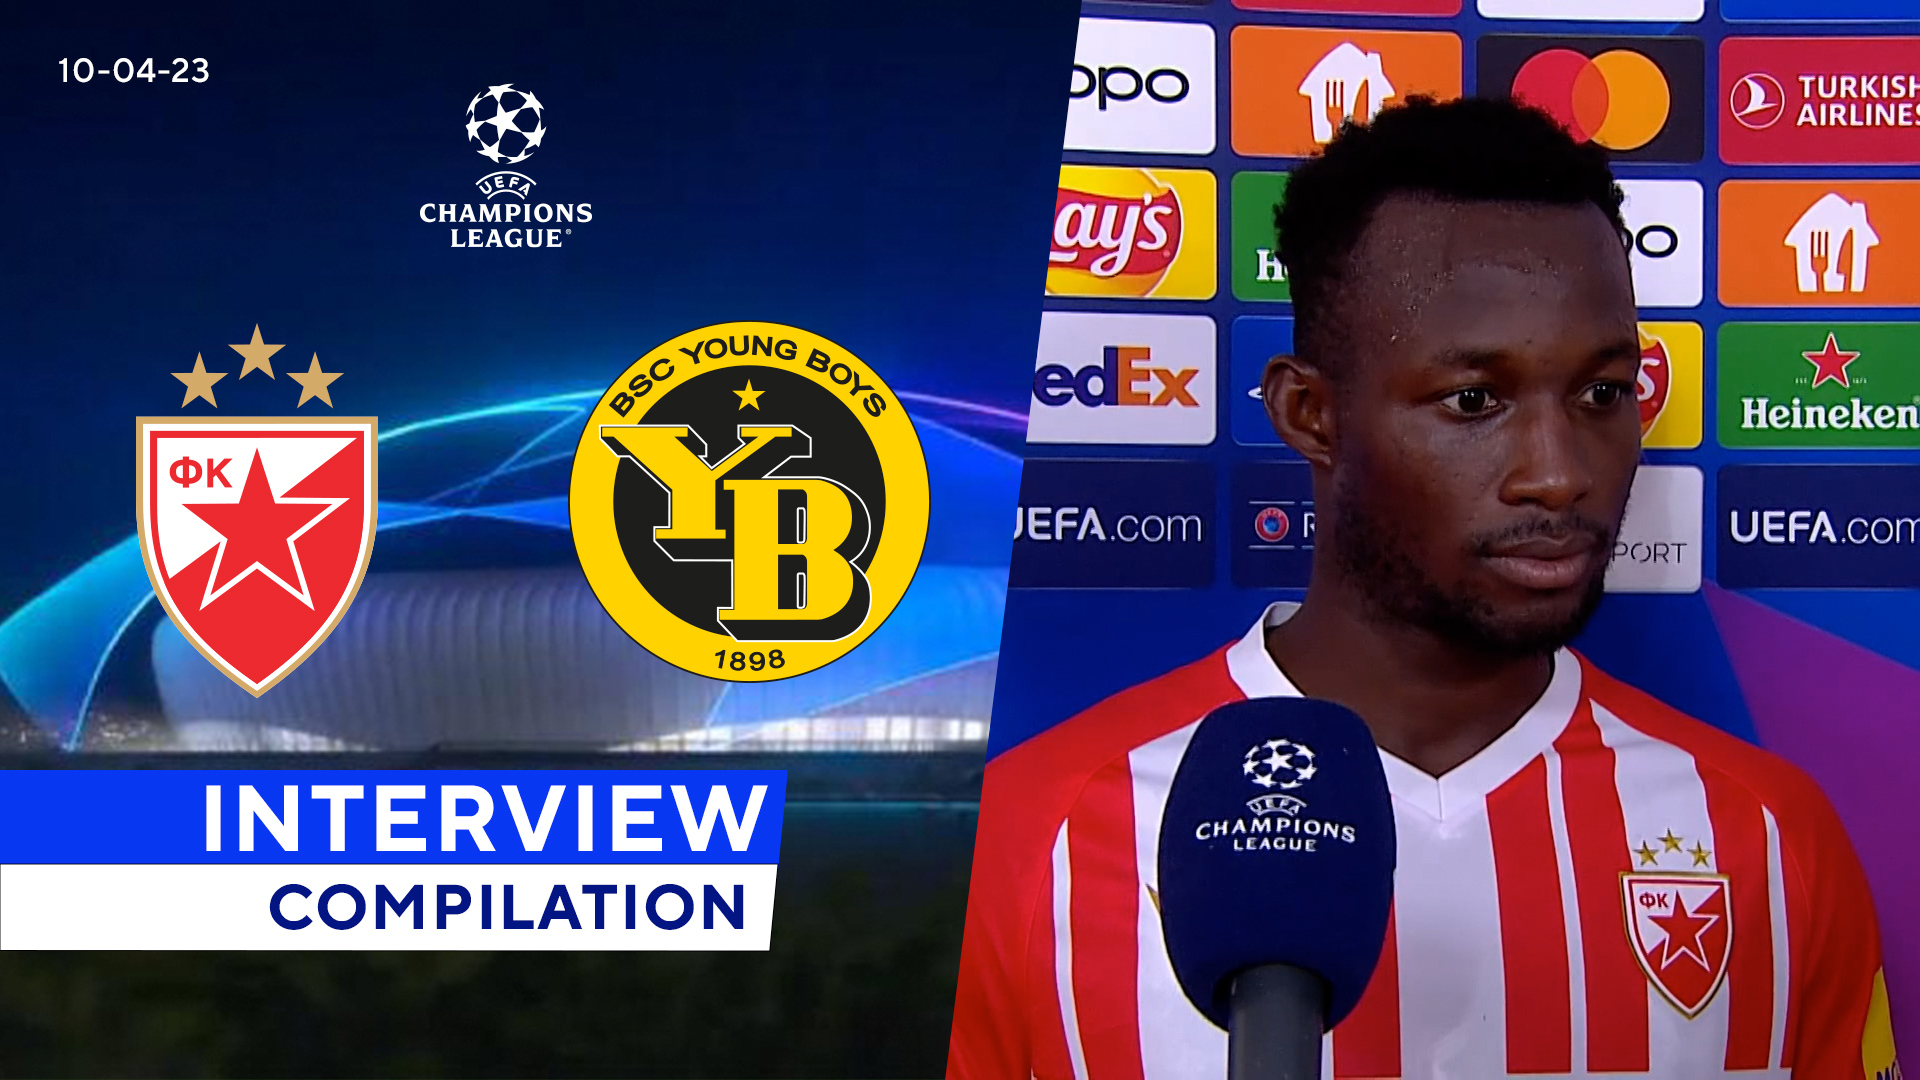 Watch UEFA Champions League: Interview Compilation: Crvena zvezda vs. Young  Boys - Group Stage - Matchday 2 - Full show on Paramount Plus